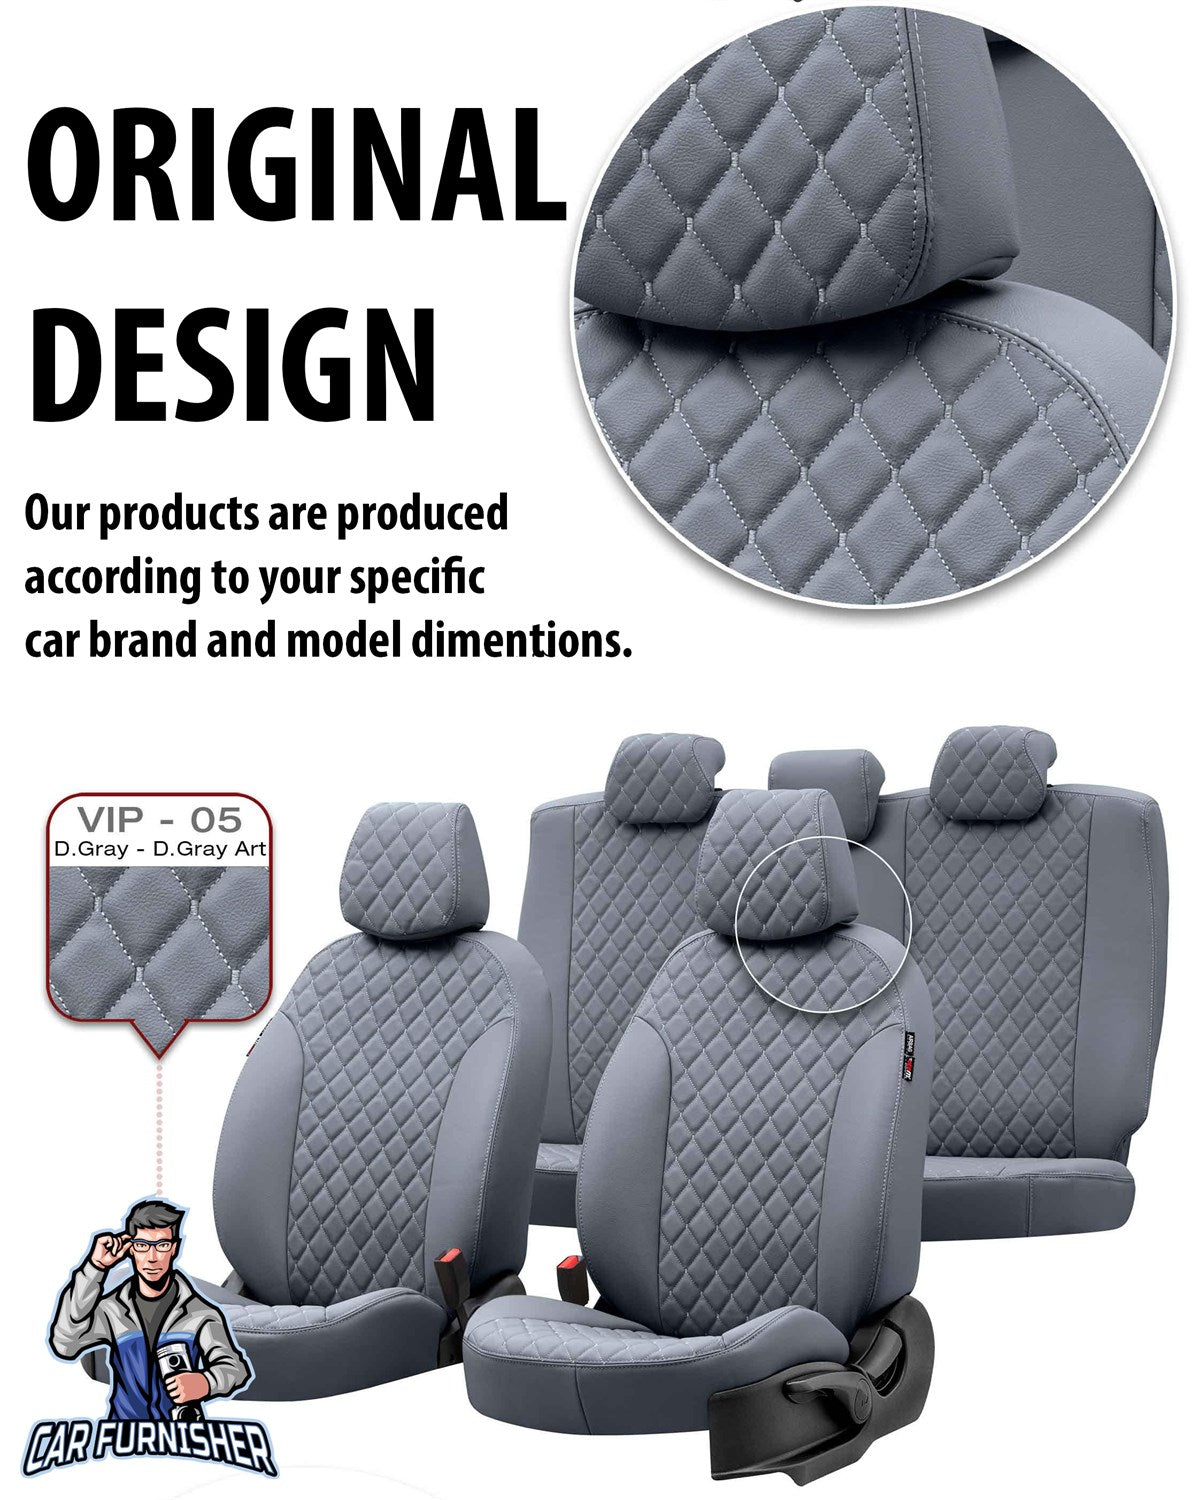 Renault Broadway Car Seat Covers 1983-2001 Madrid Design Smoked Full Set (5 Seats + Handrest) Full Leather